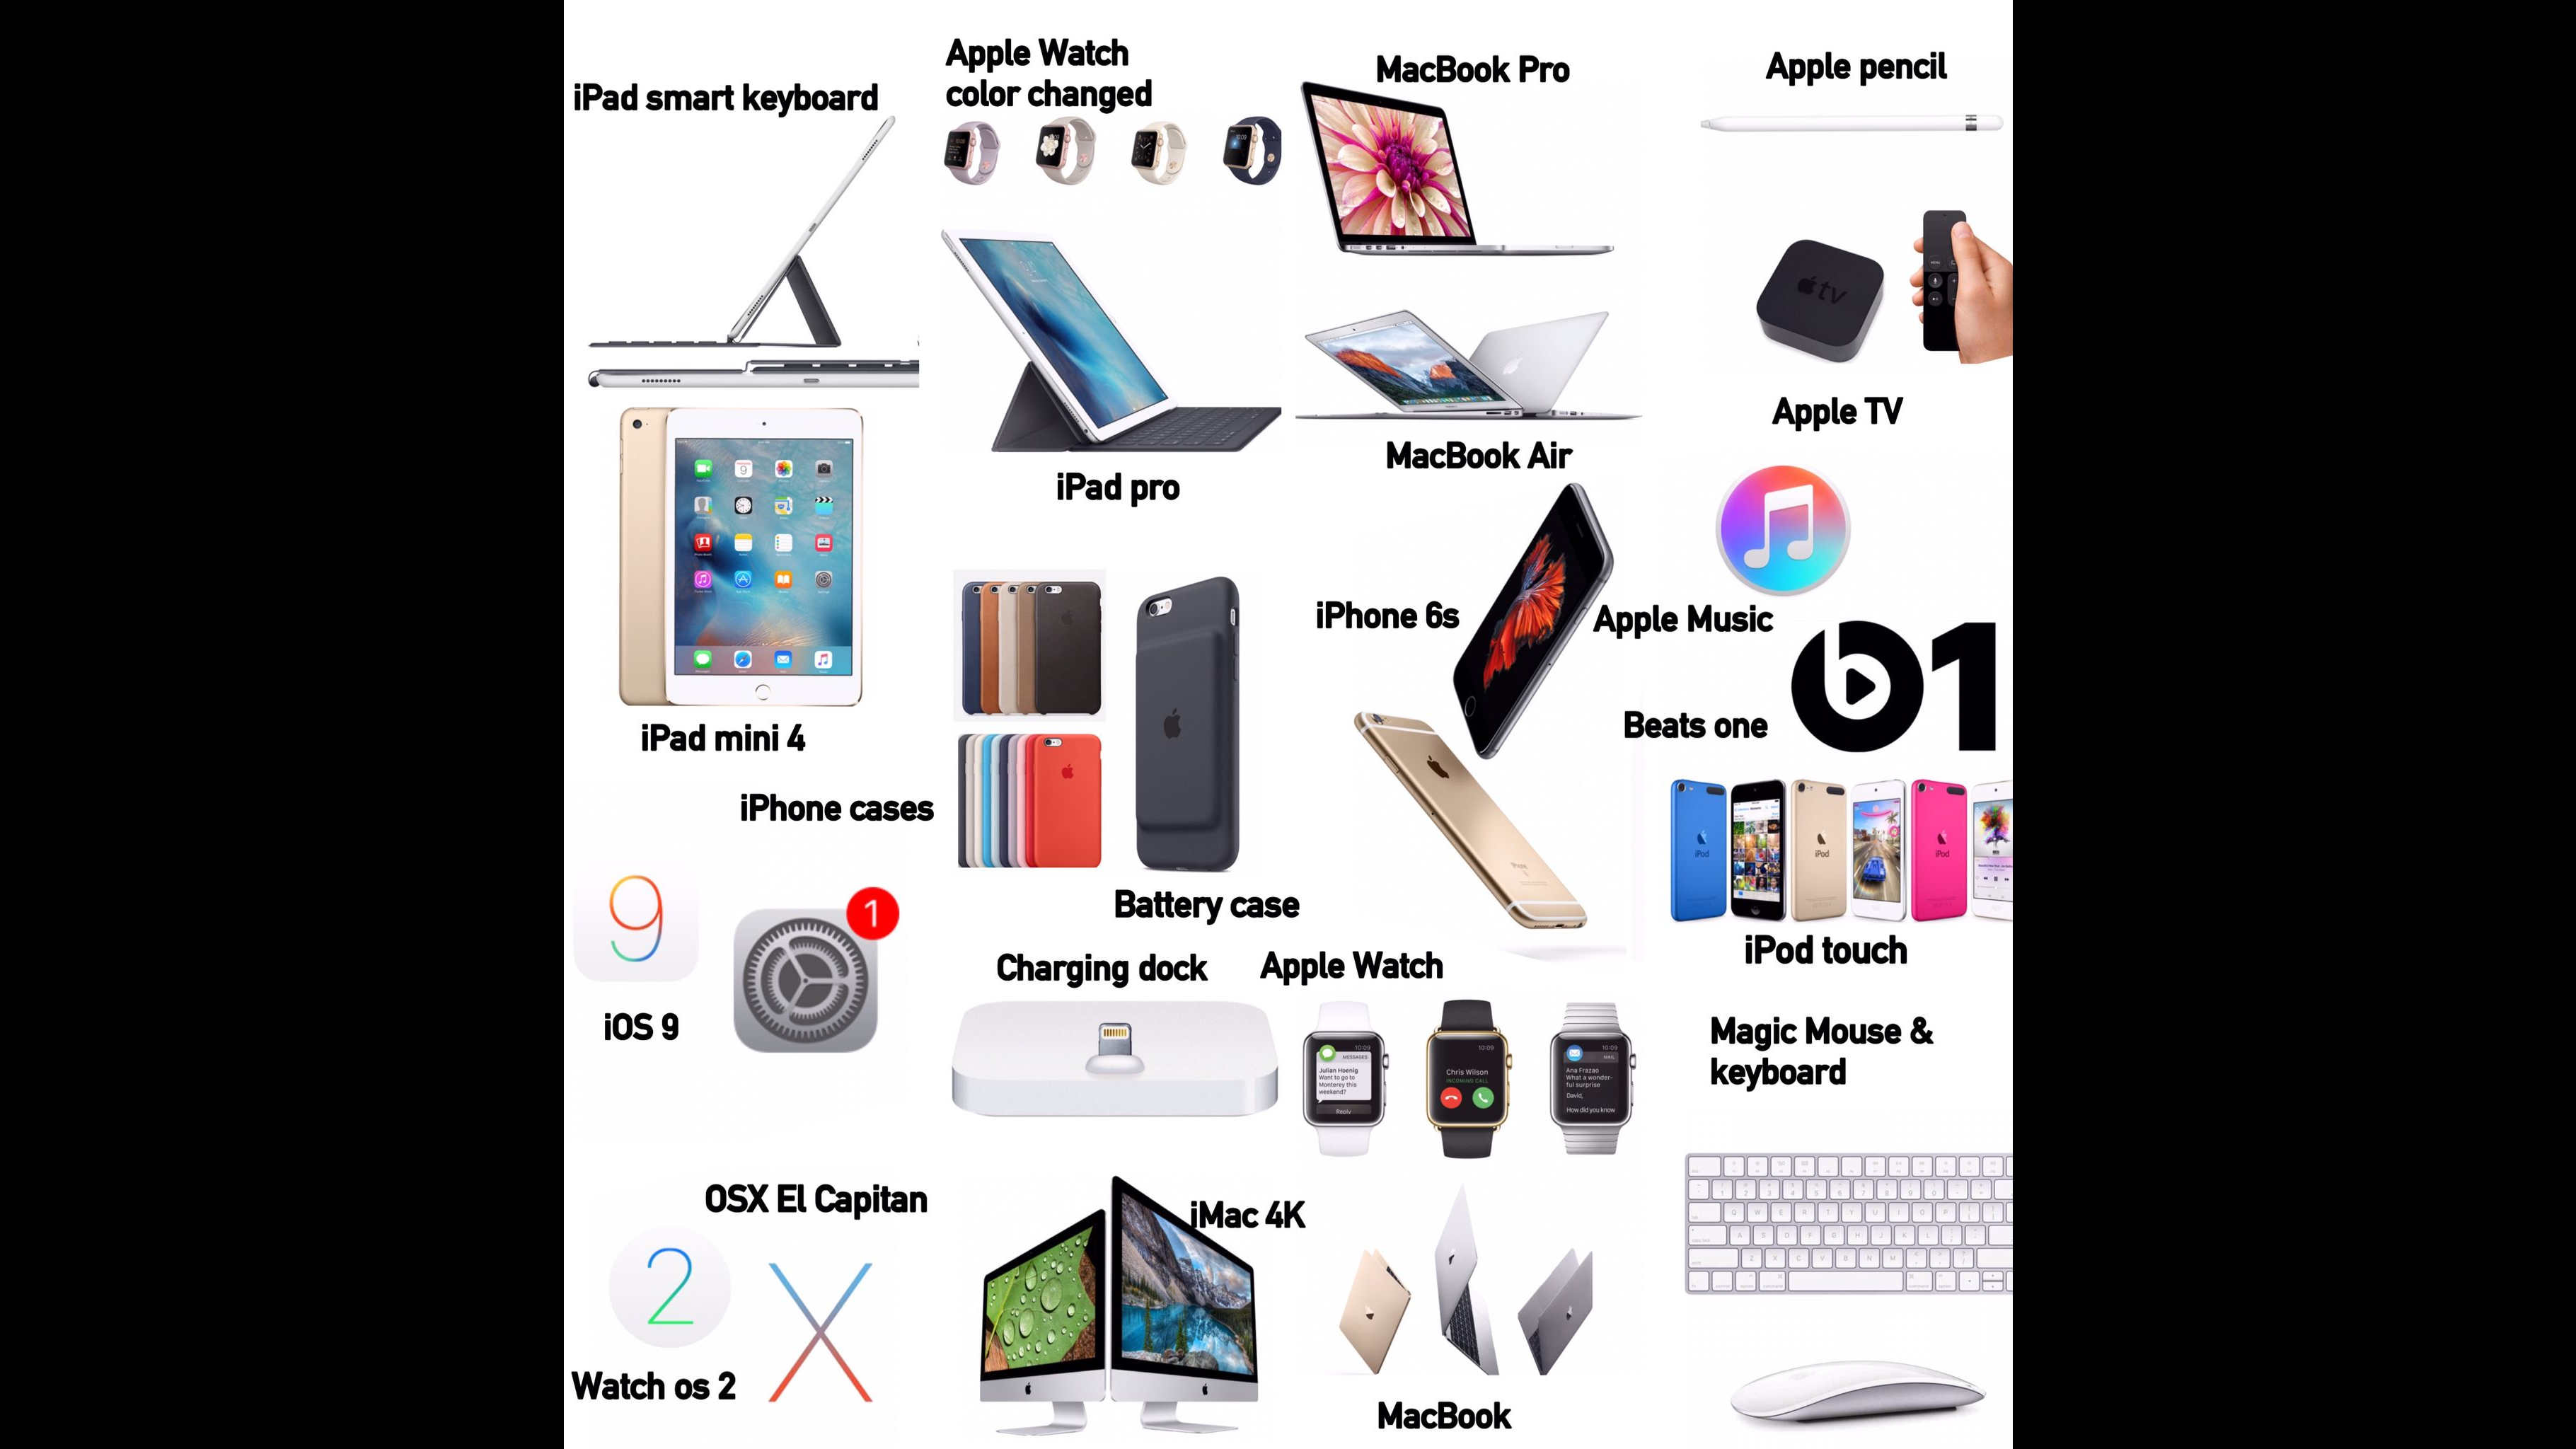 All Apple products made with their name